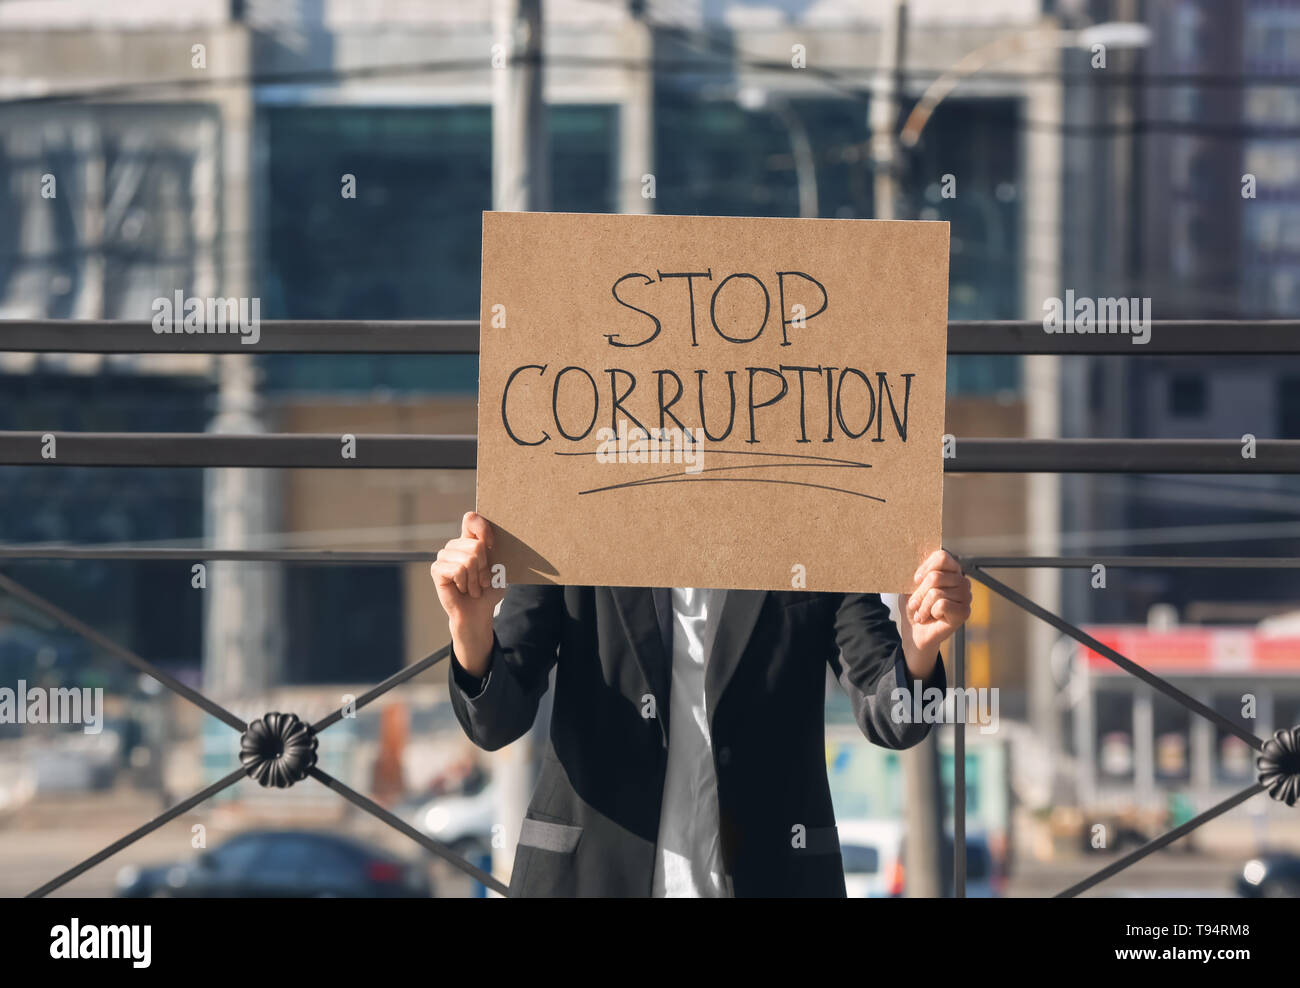 Woman holding placard with text STOP CORRUPTION outdoors Stock Photo